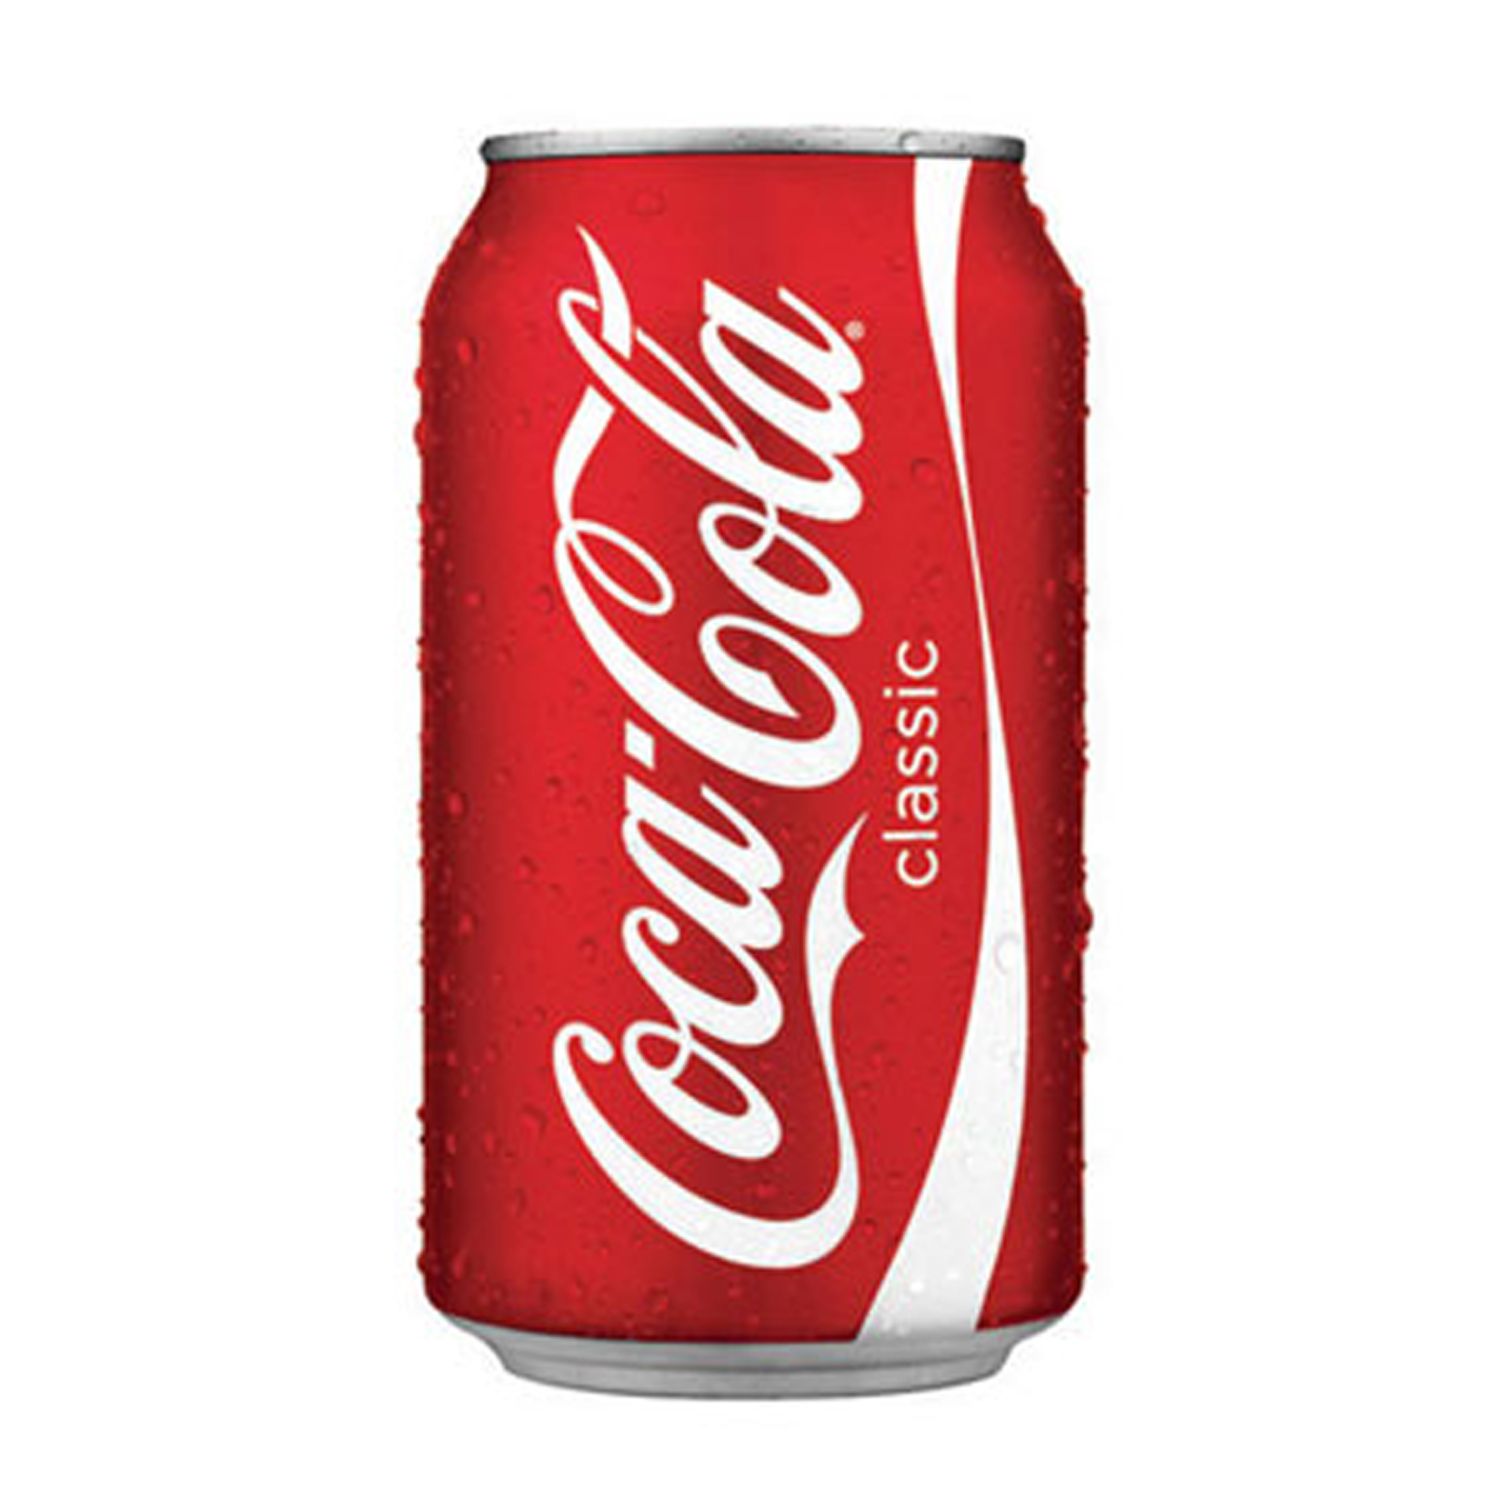 Free soda clipart free graphics images and photos image